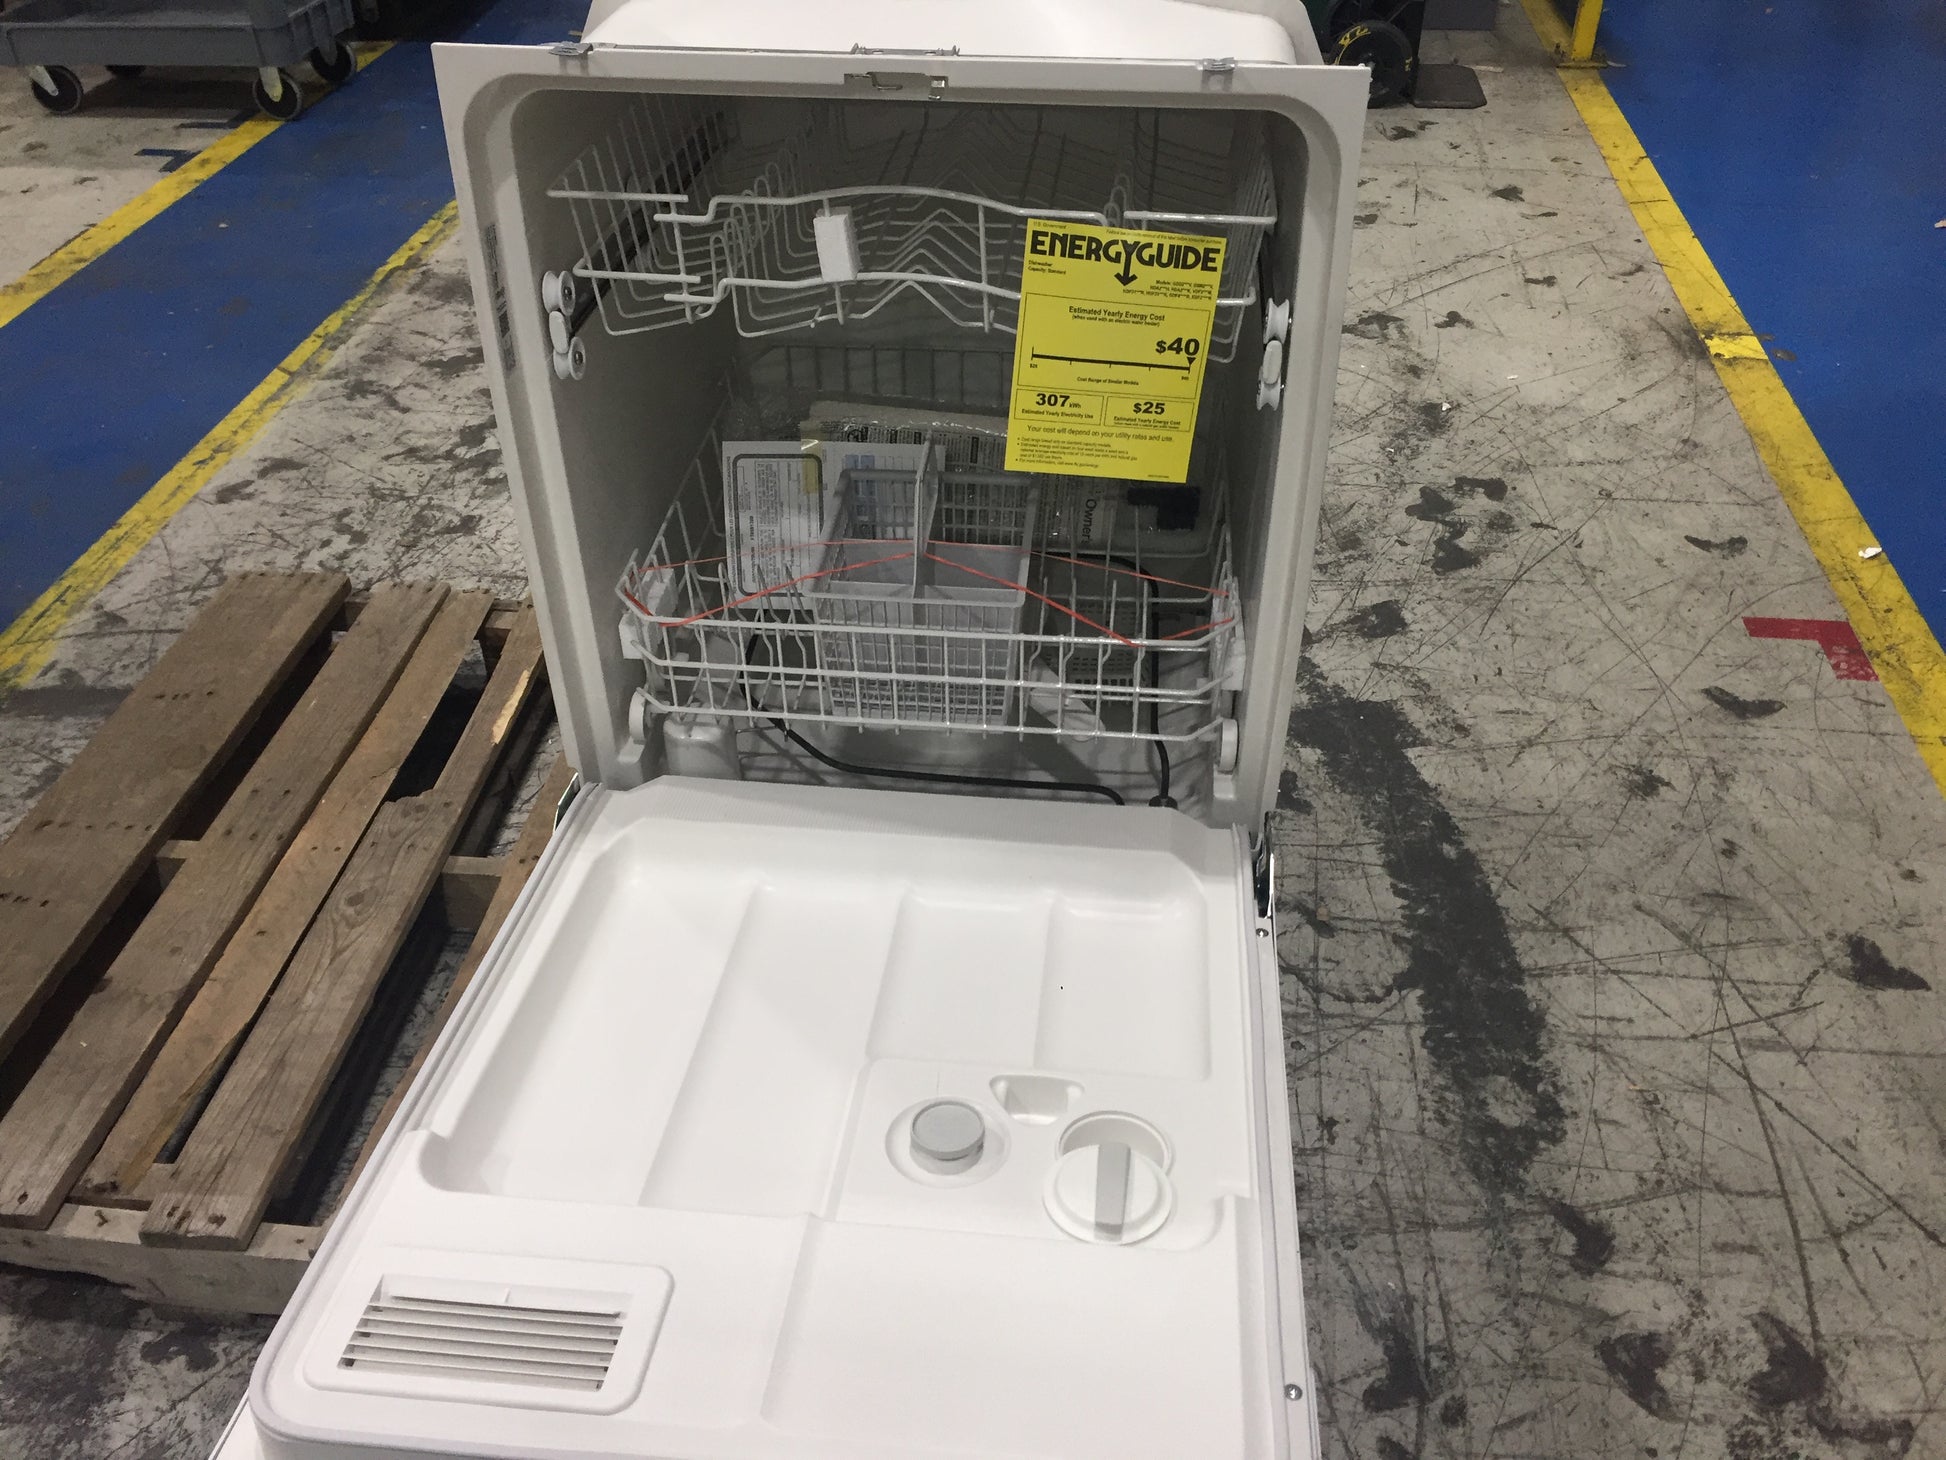 24" BUILT-IN FRONT CONTROL DISHWASHER; WHITE